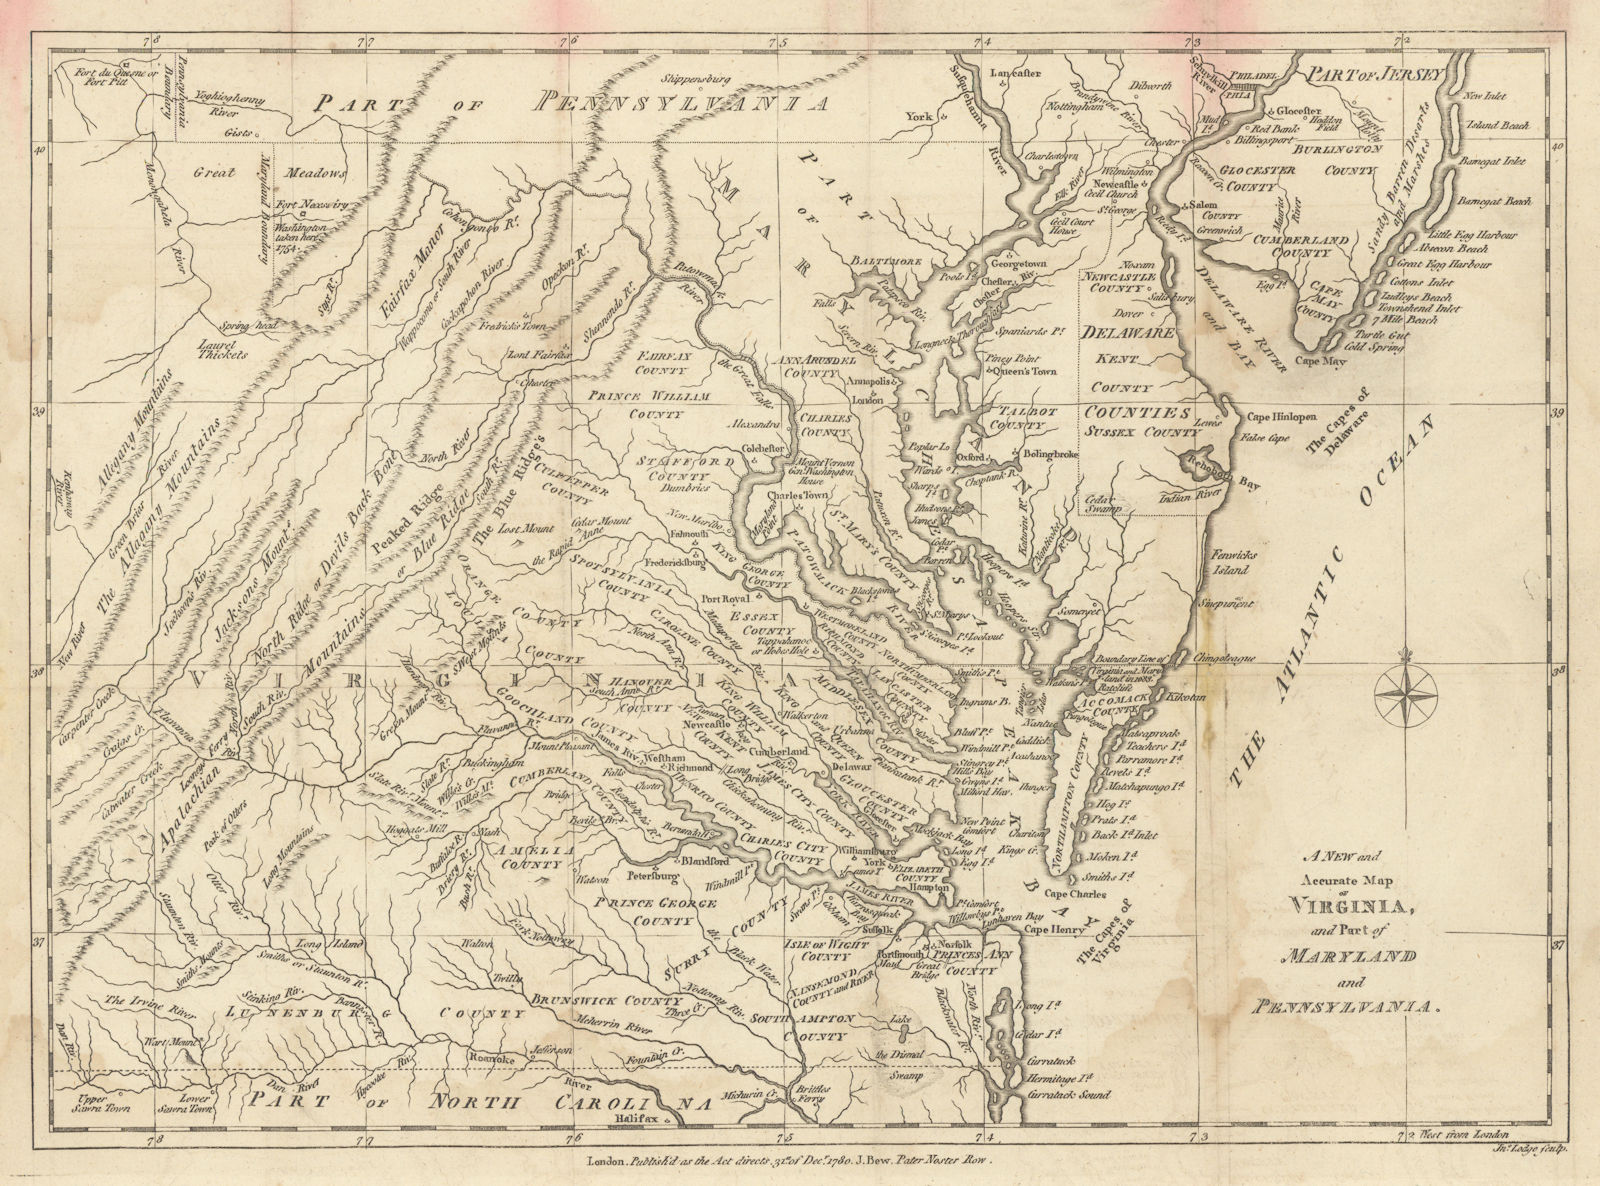 A New & Accurate Map of Virginia, part of Maryland & Pennsylvania LODGE 1780